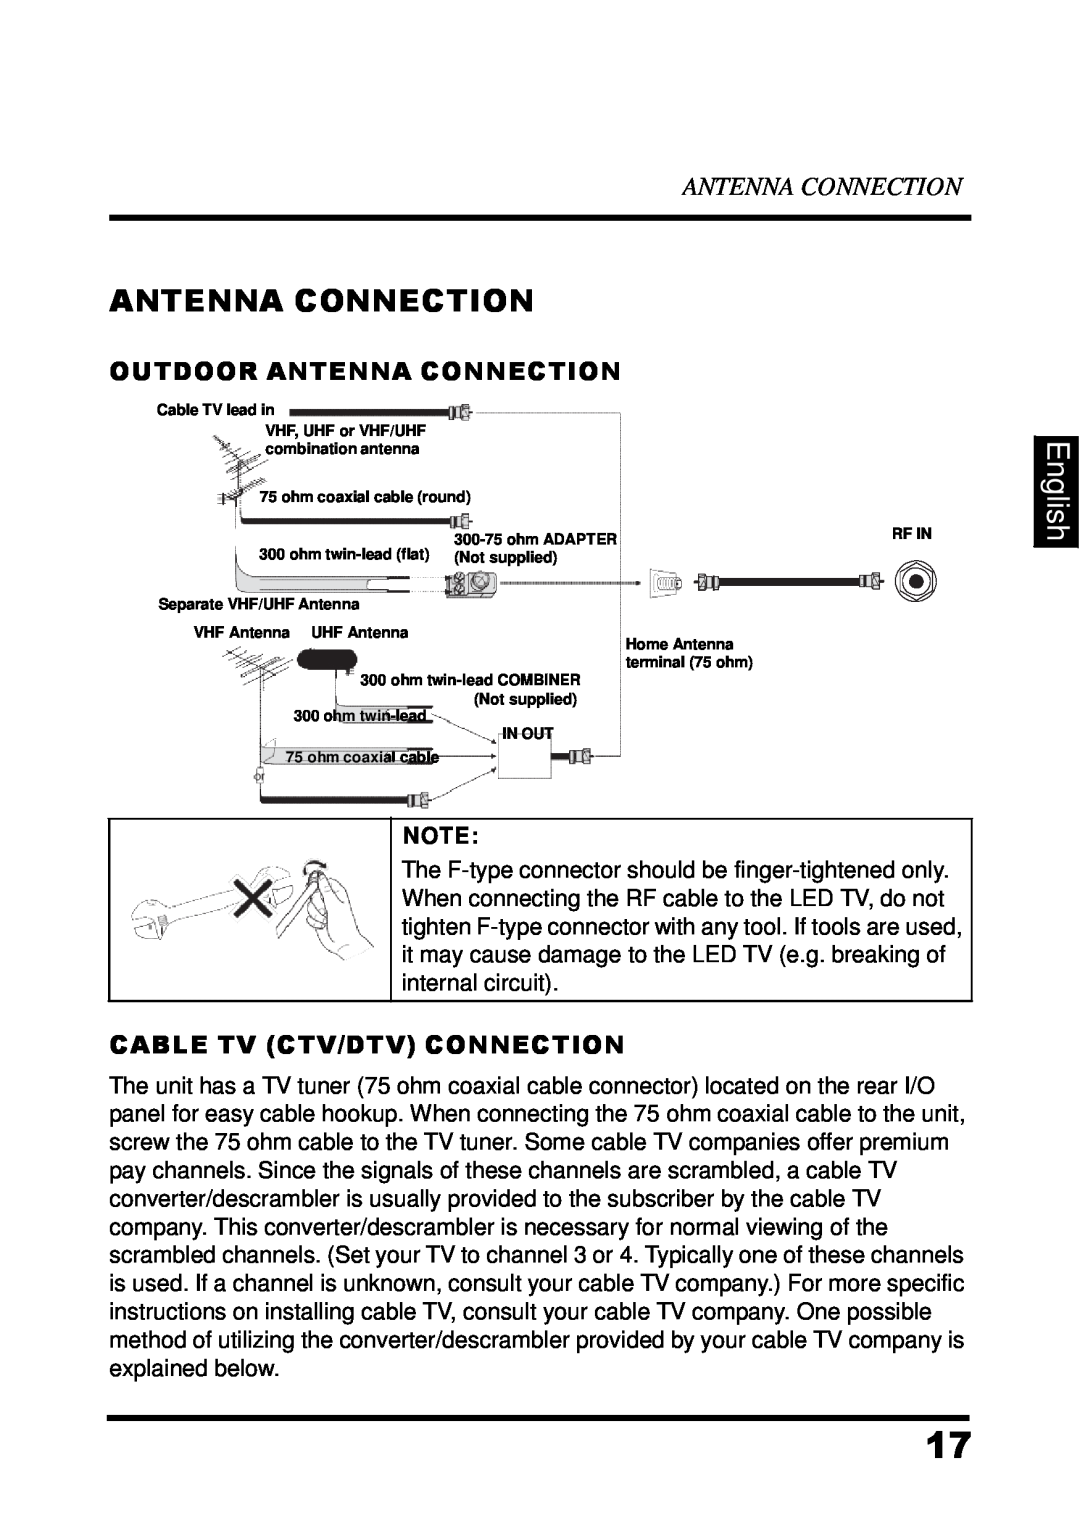 Westinghouse UW48T7HW manual English, Outdoor Antenna Connection, Cable Tv Ctv/Dtv Connection 